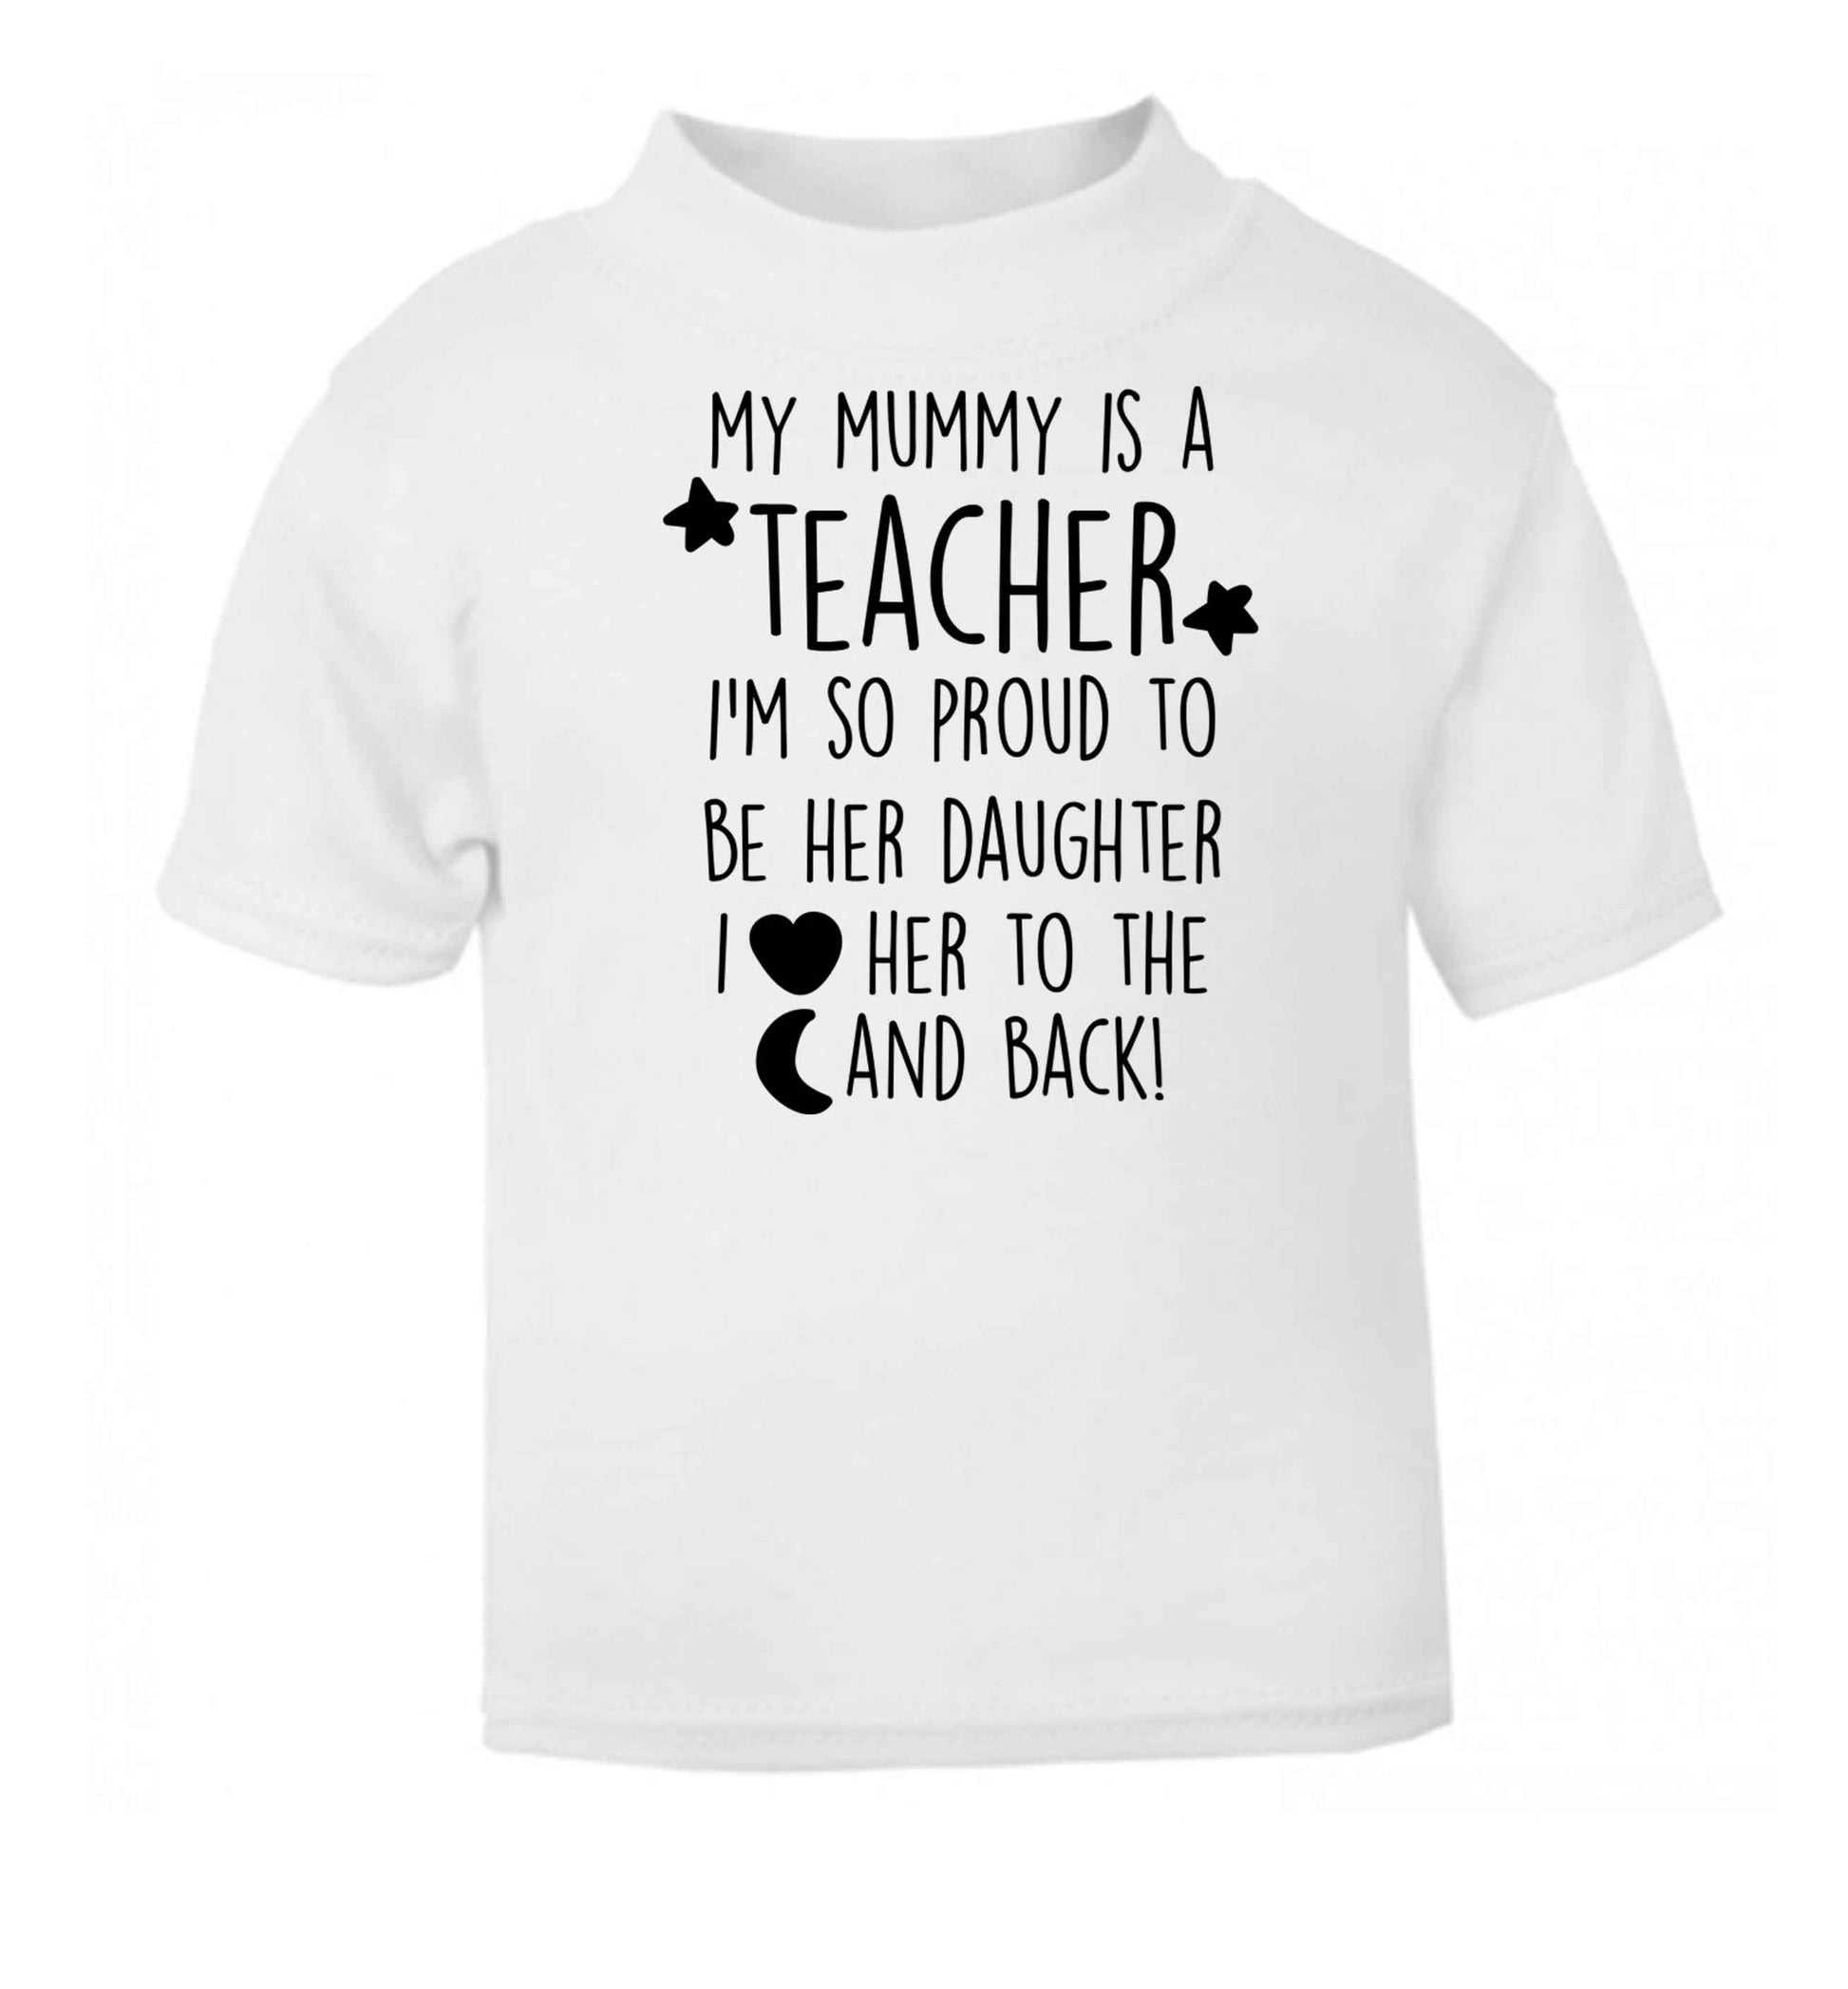 My mummy is a teacher I'm so proud to be her daughter I love her to the moon and back white baby toddler Tshirt 2 Years